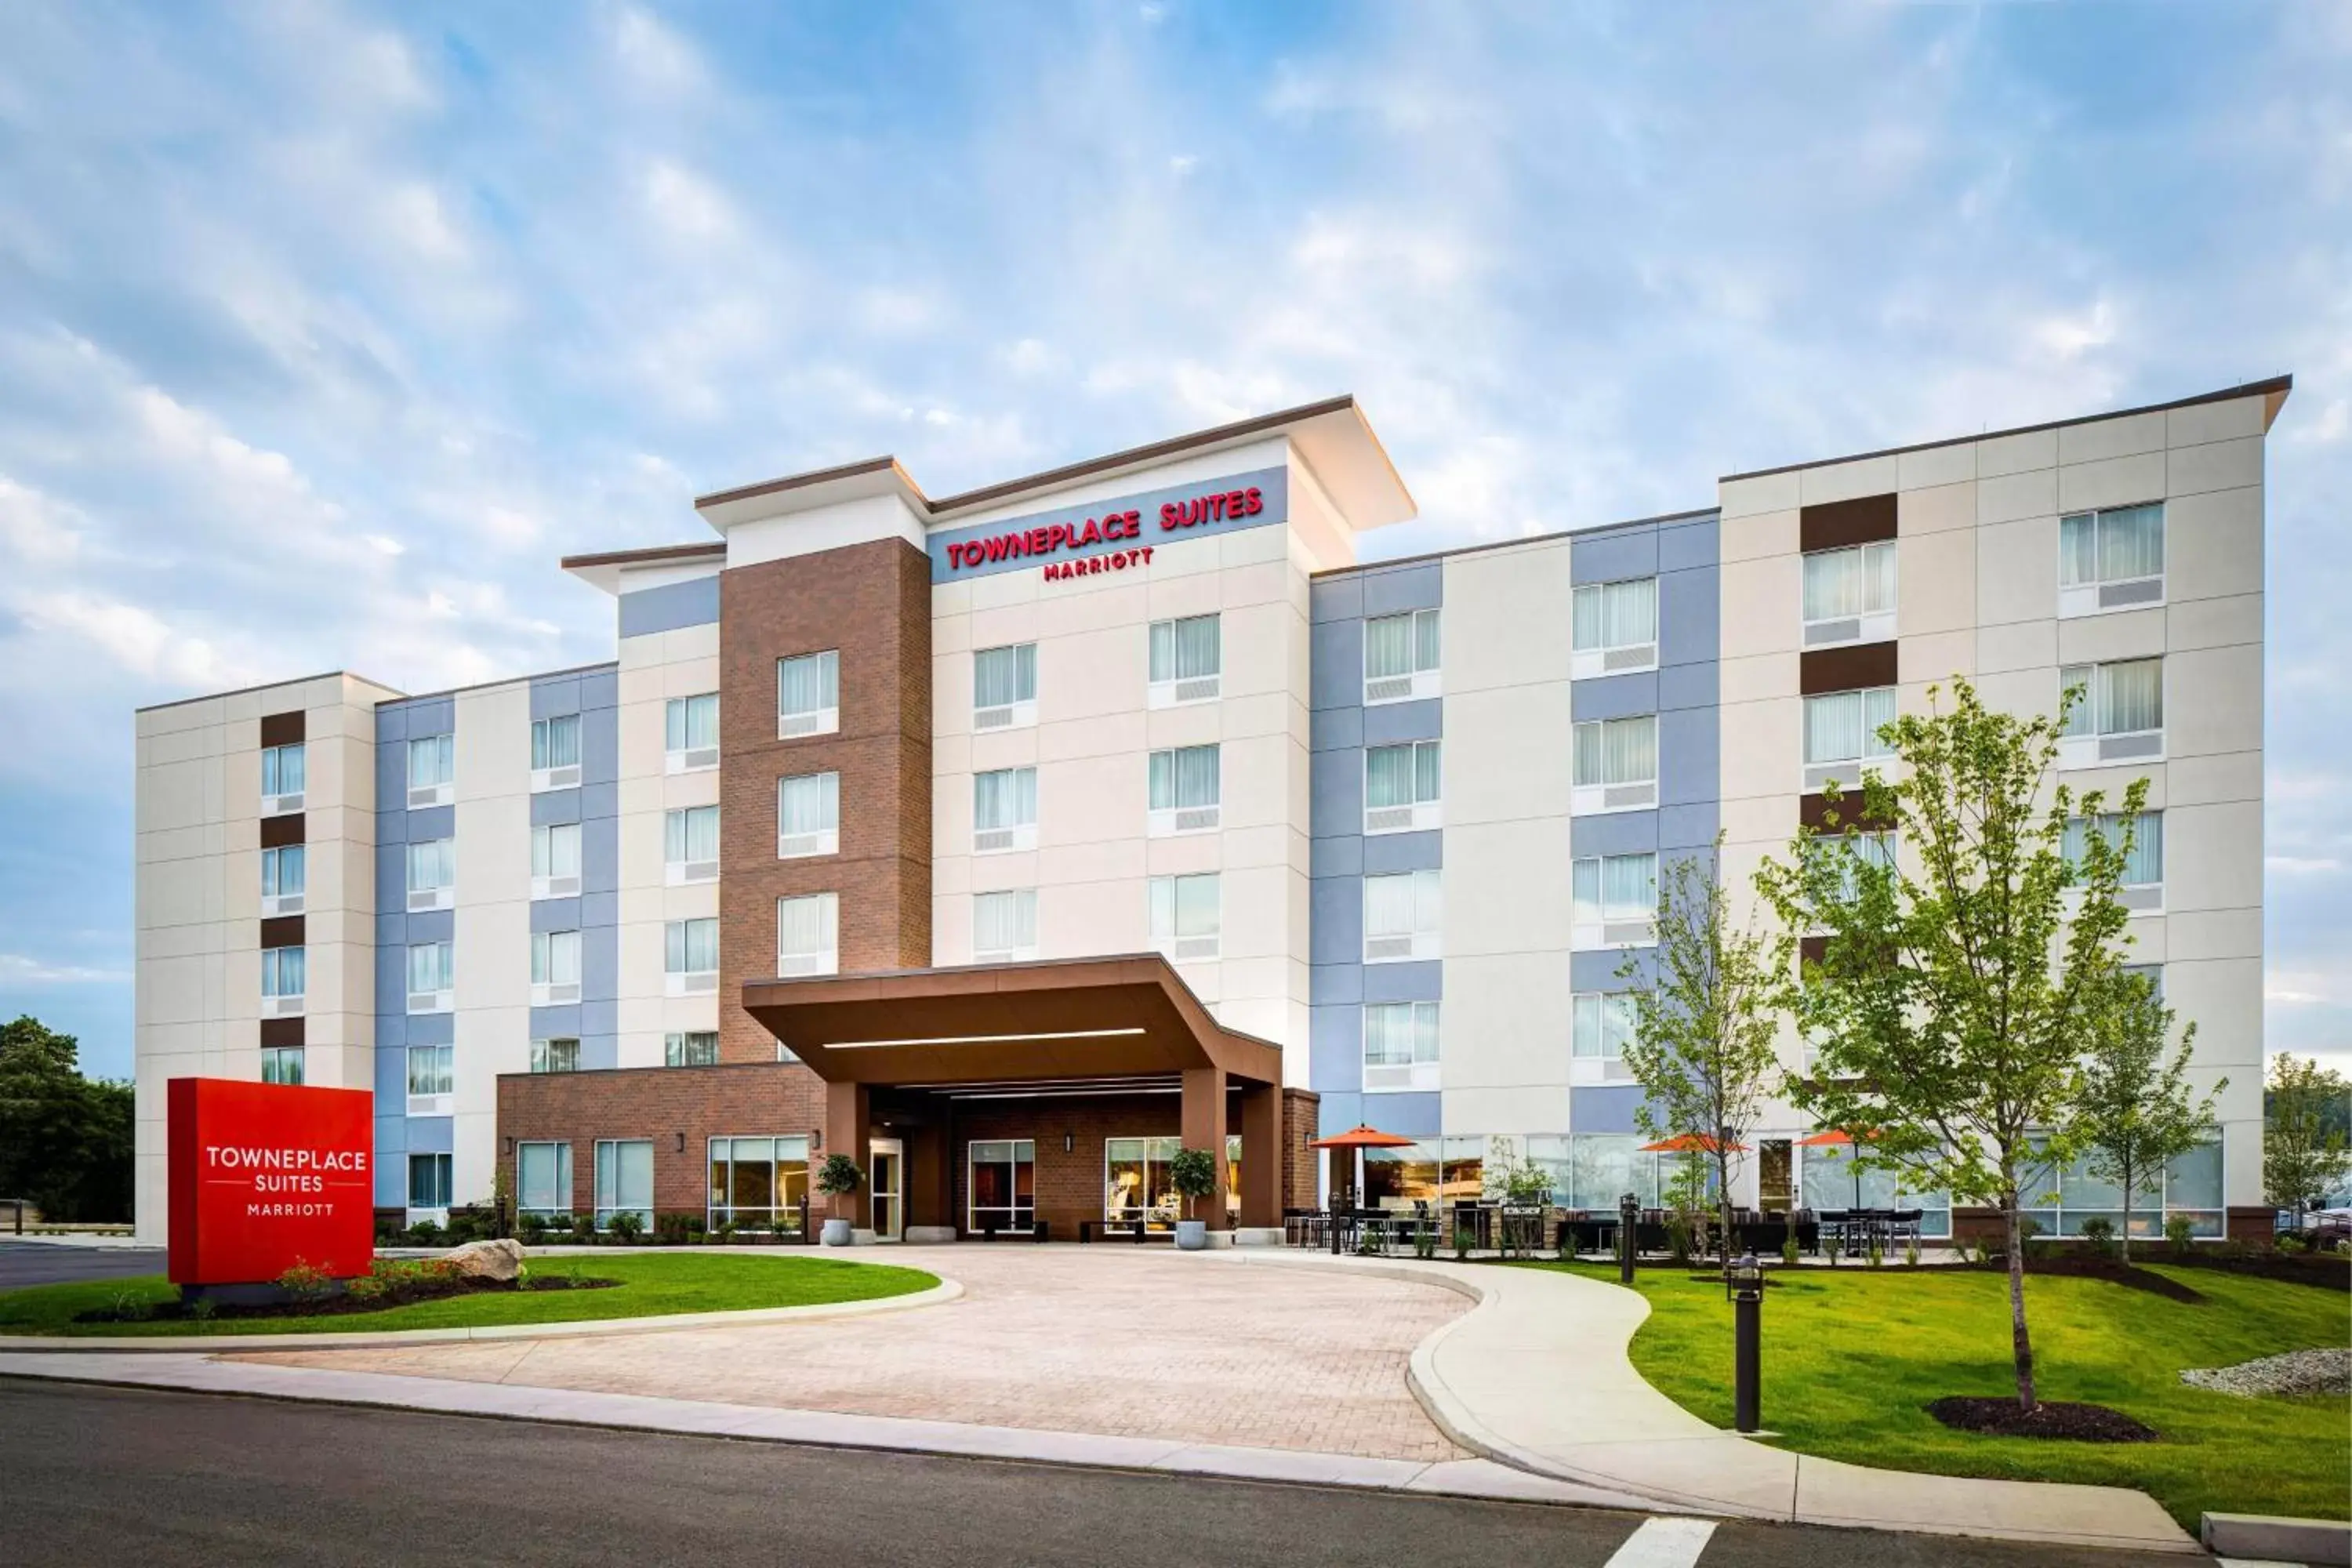 Property Building in SpringHill Suites by Marriott Cape Canaveral Cocoa Beach